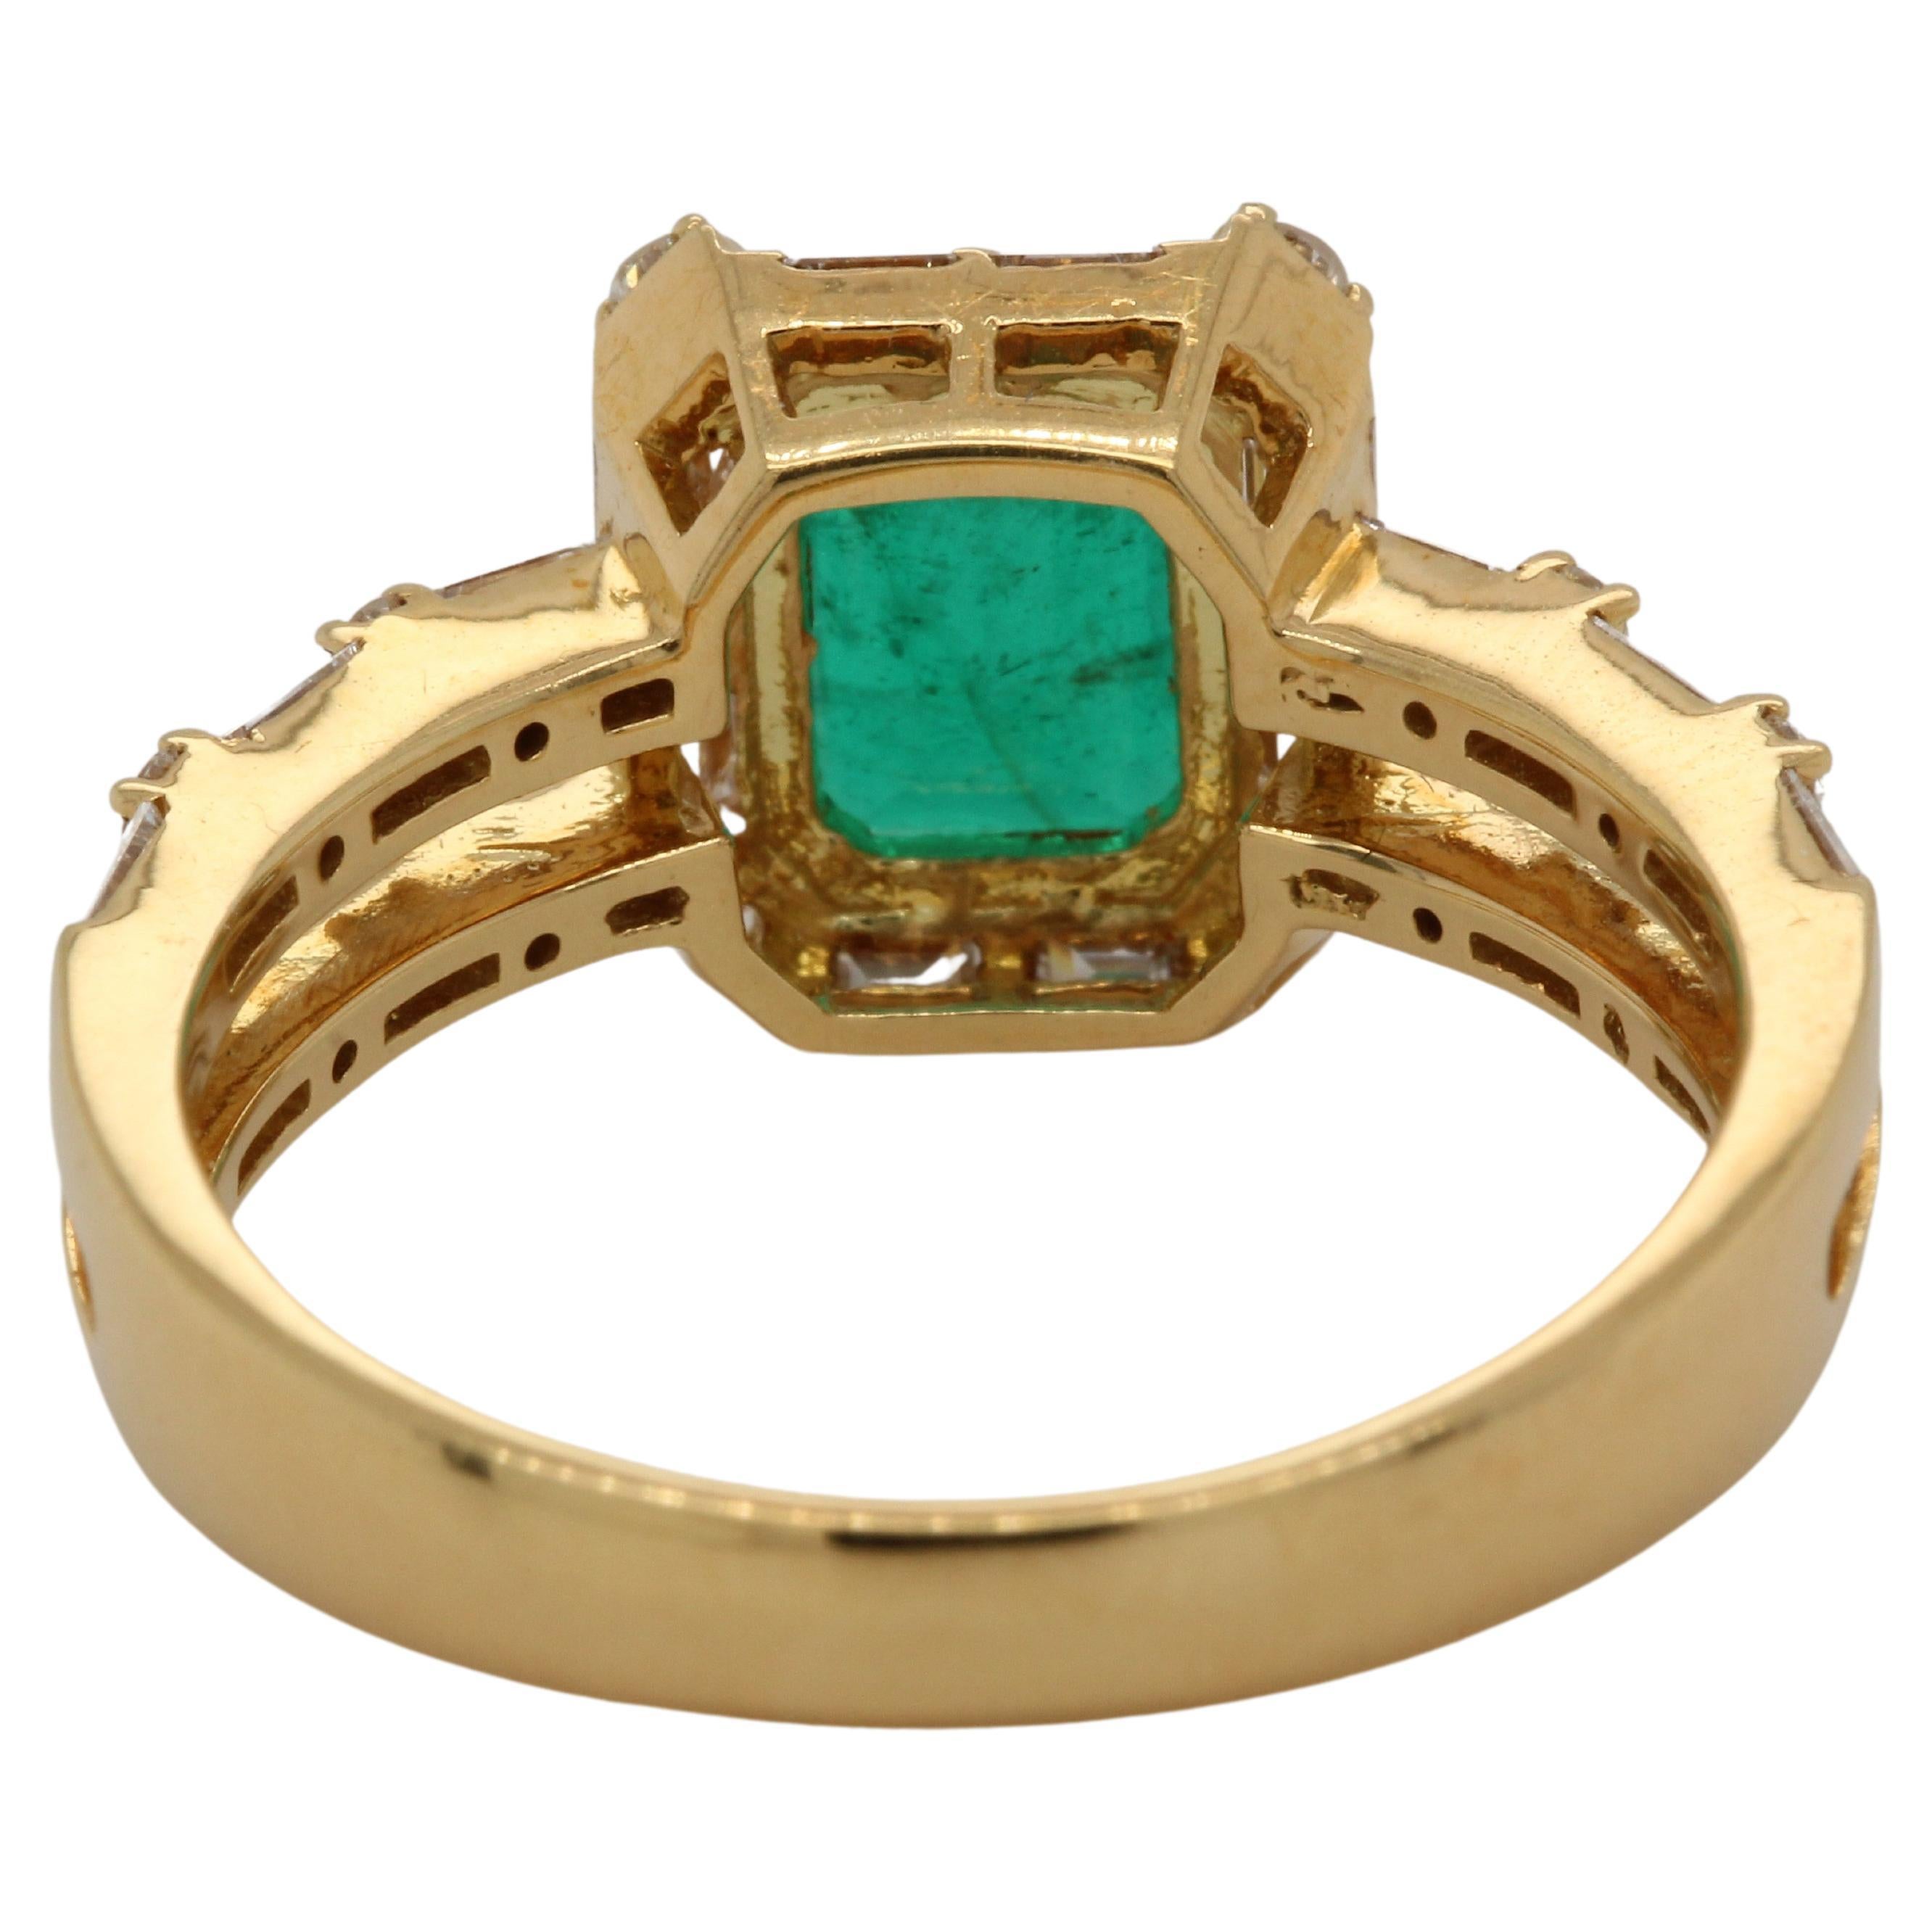 1.04 Carat Emerald and Diamond Solitaire Ring in 18 Karat Gold For Sale 3